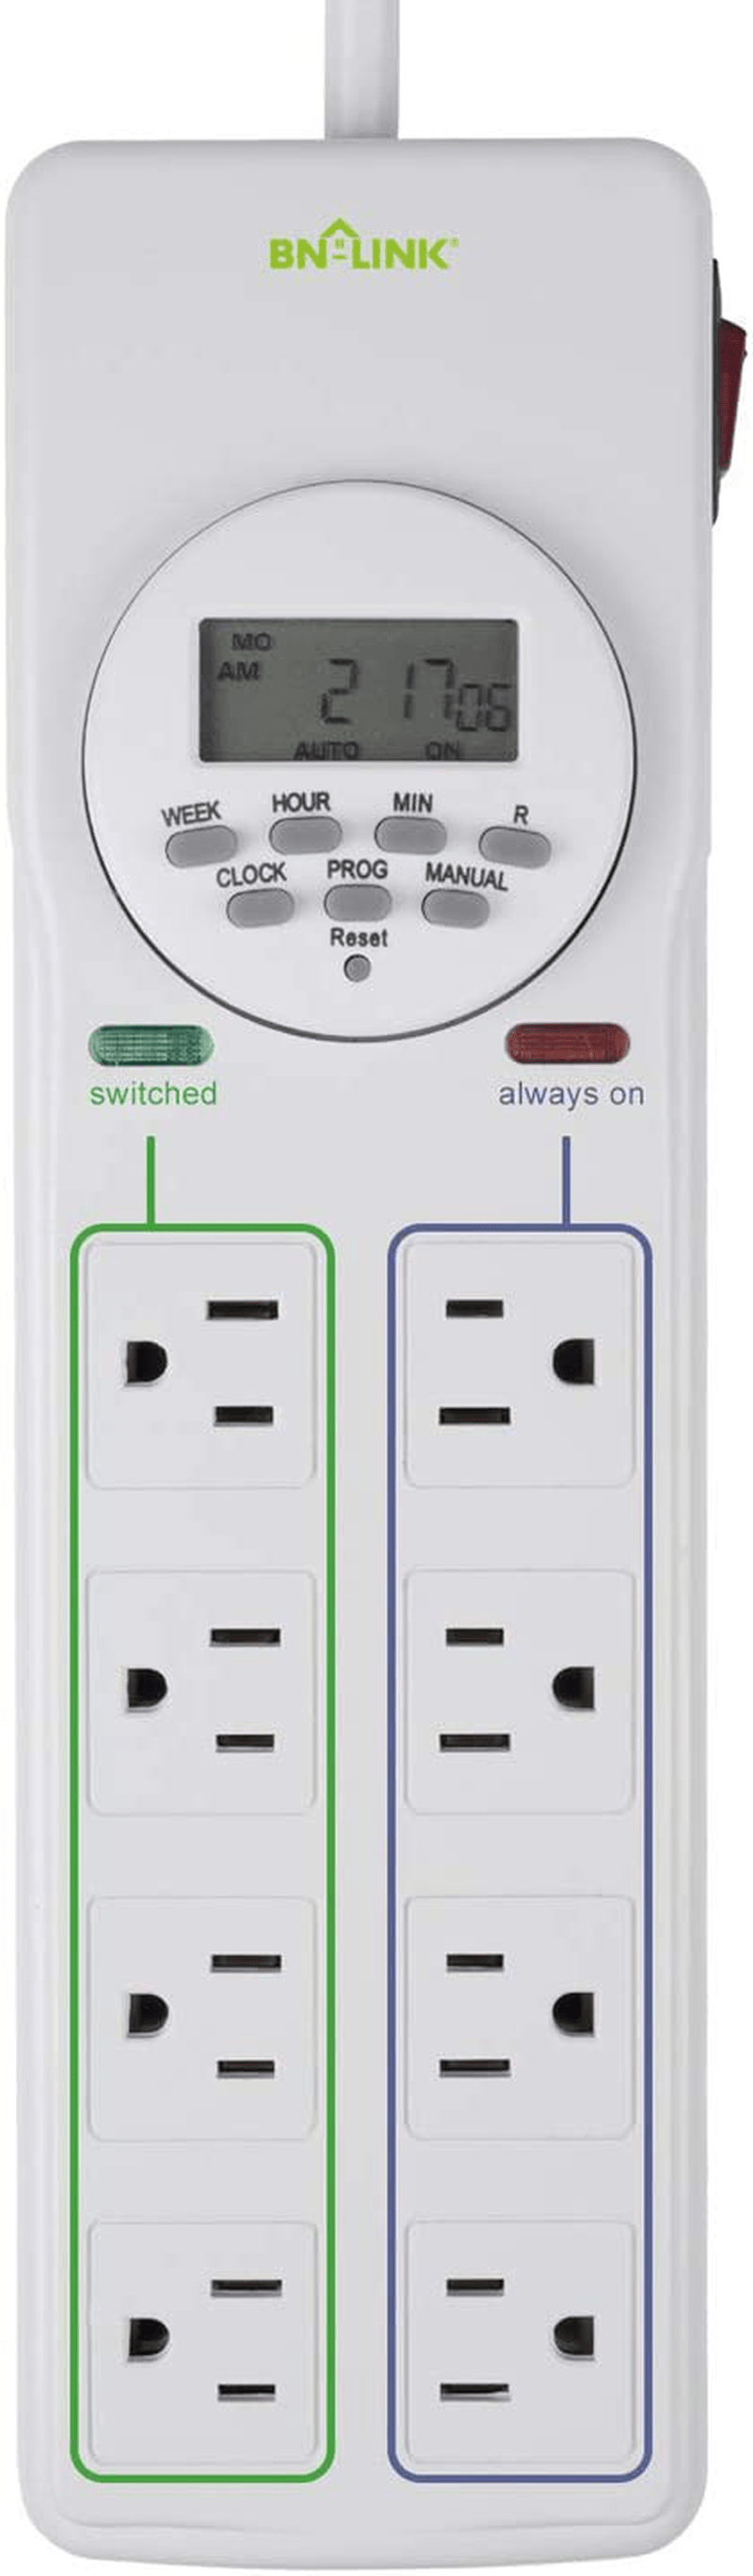 BN-LINK 8 Outlet Surge Protector with 7-Day Digital Timer (4 Outlets Timed, 4 Outlets Always On) - White Home & Garden > Lighting Accessories > Lighting Timers BN-LINK Default Title  